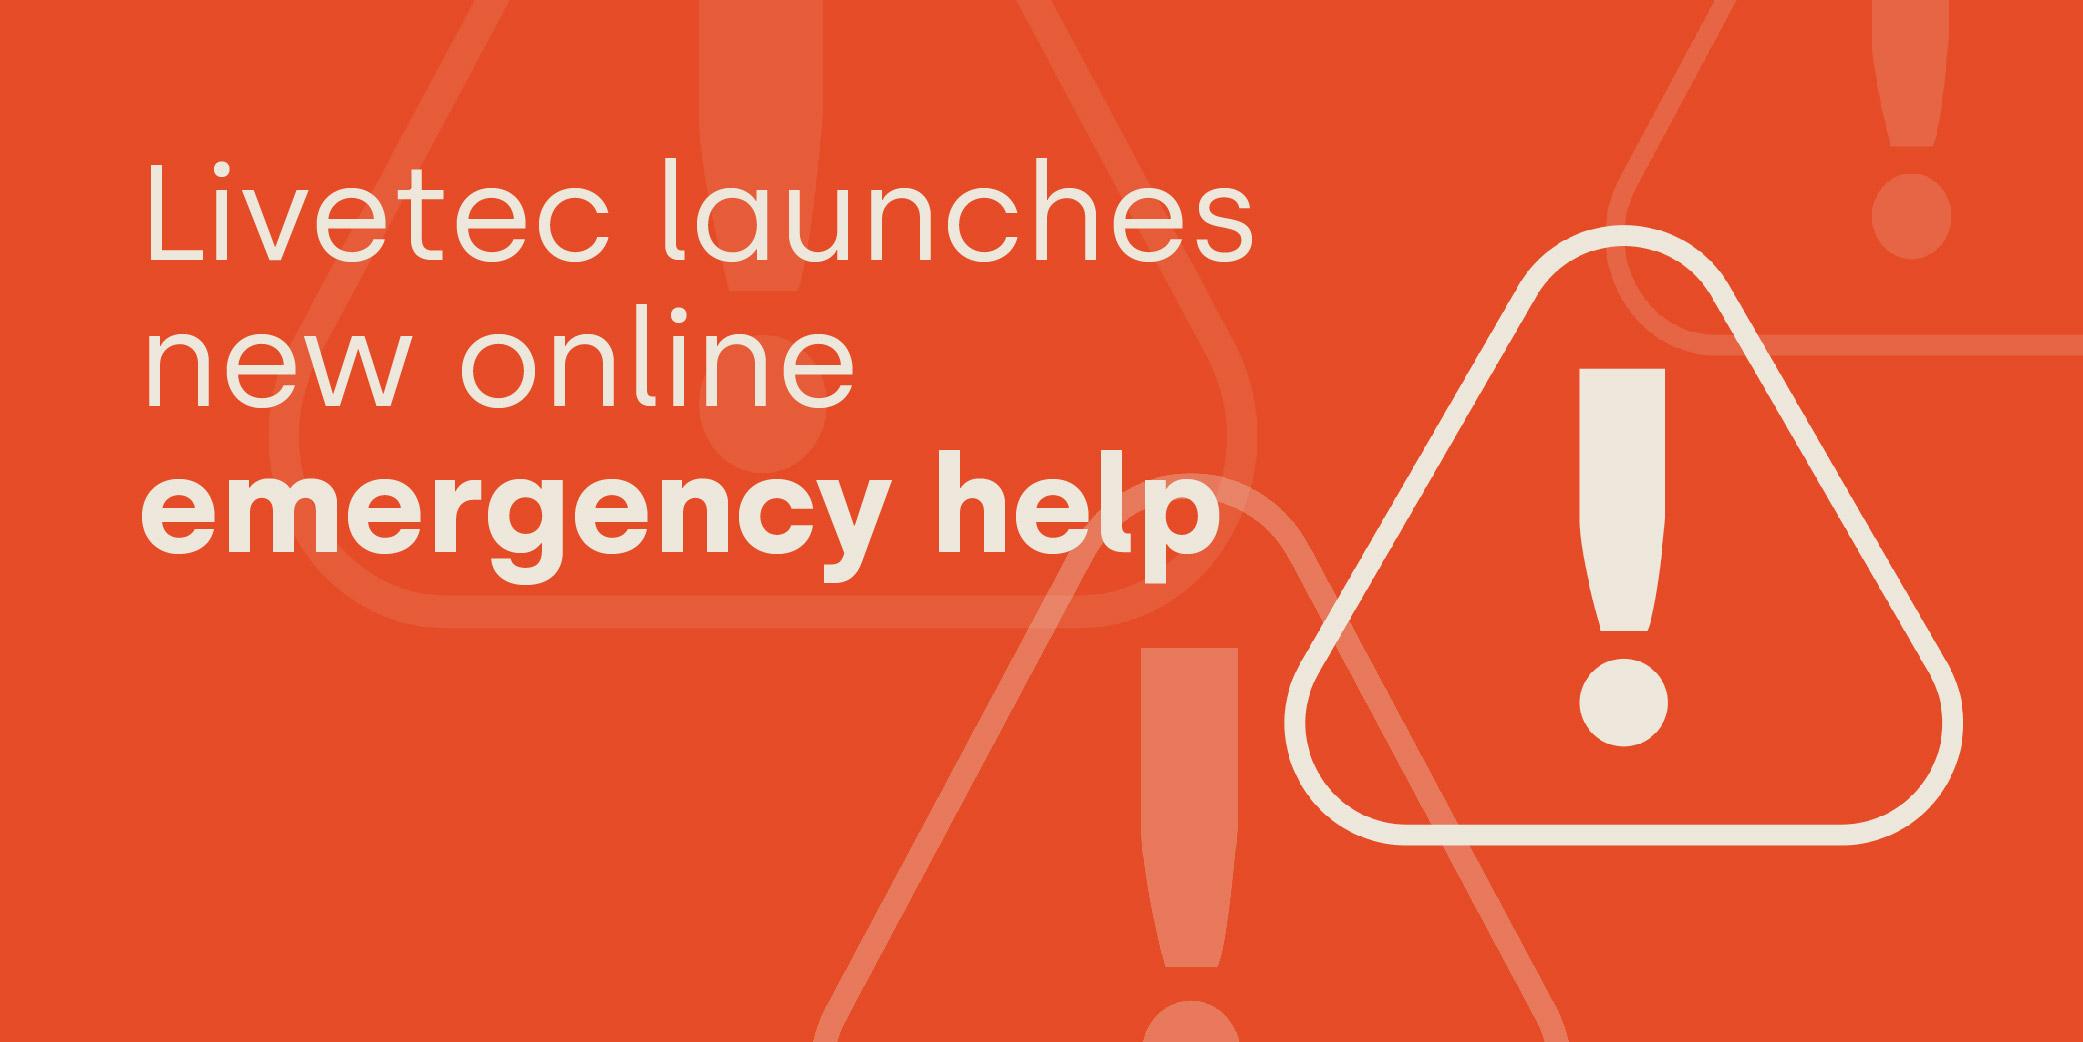 Livetec launches new online emergency help